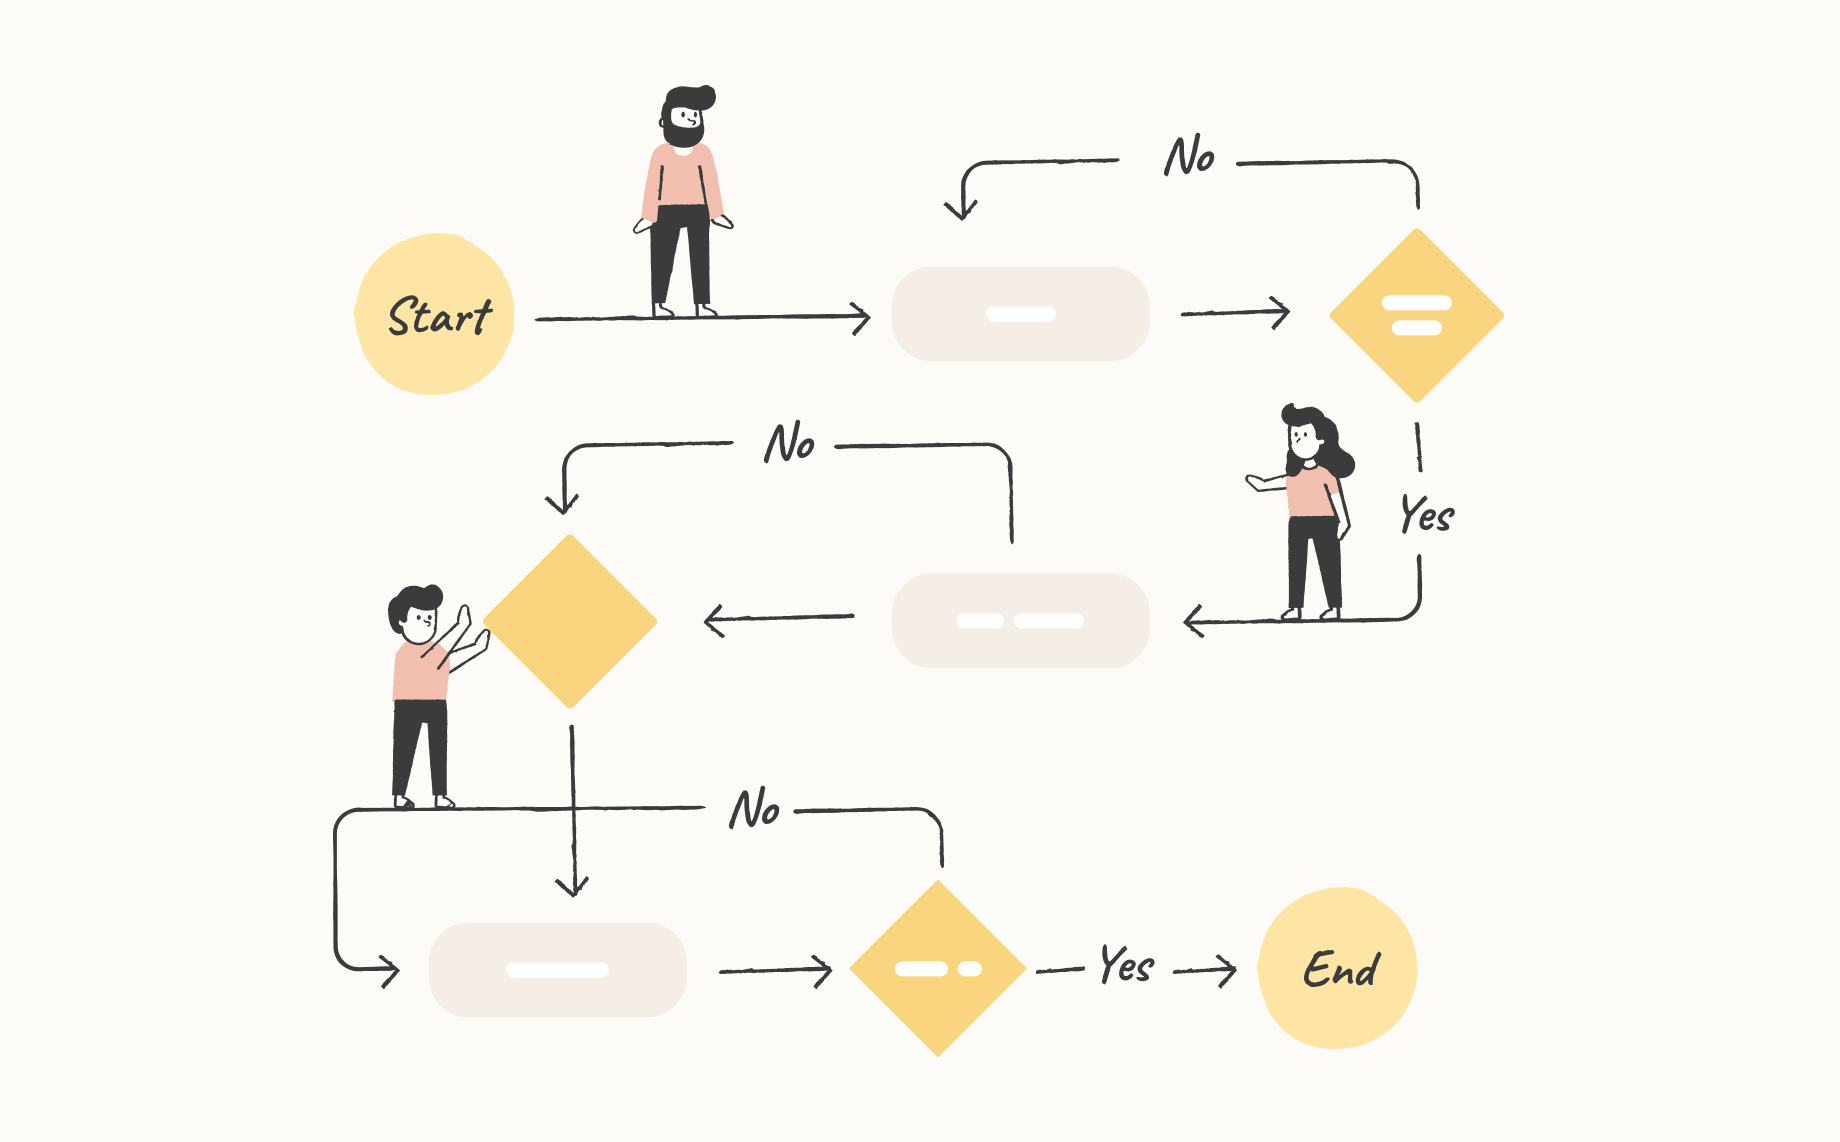 USER FLOW can be defined as the path taken by users while using a product  how users move from the  by SAMUEL AYINLA  Medium